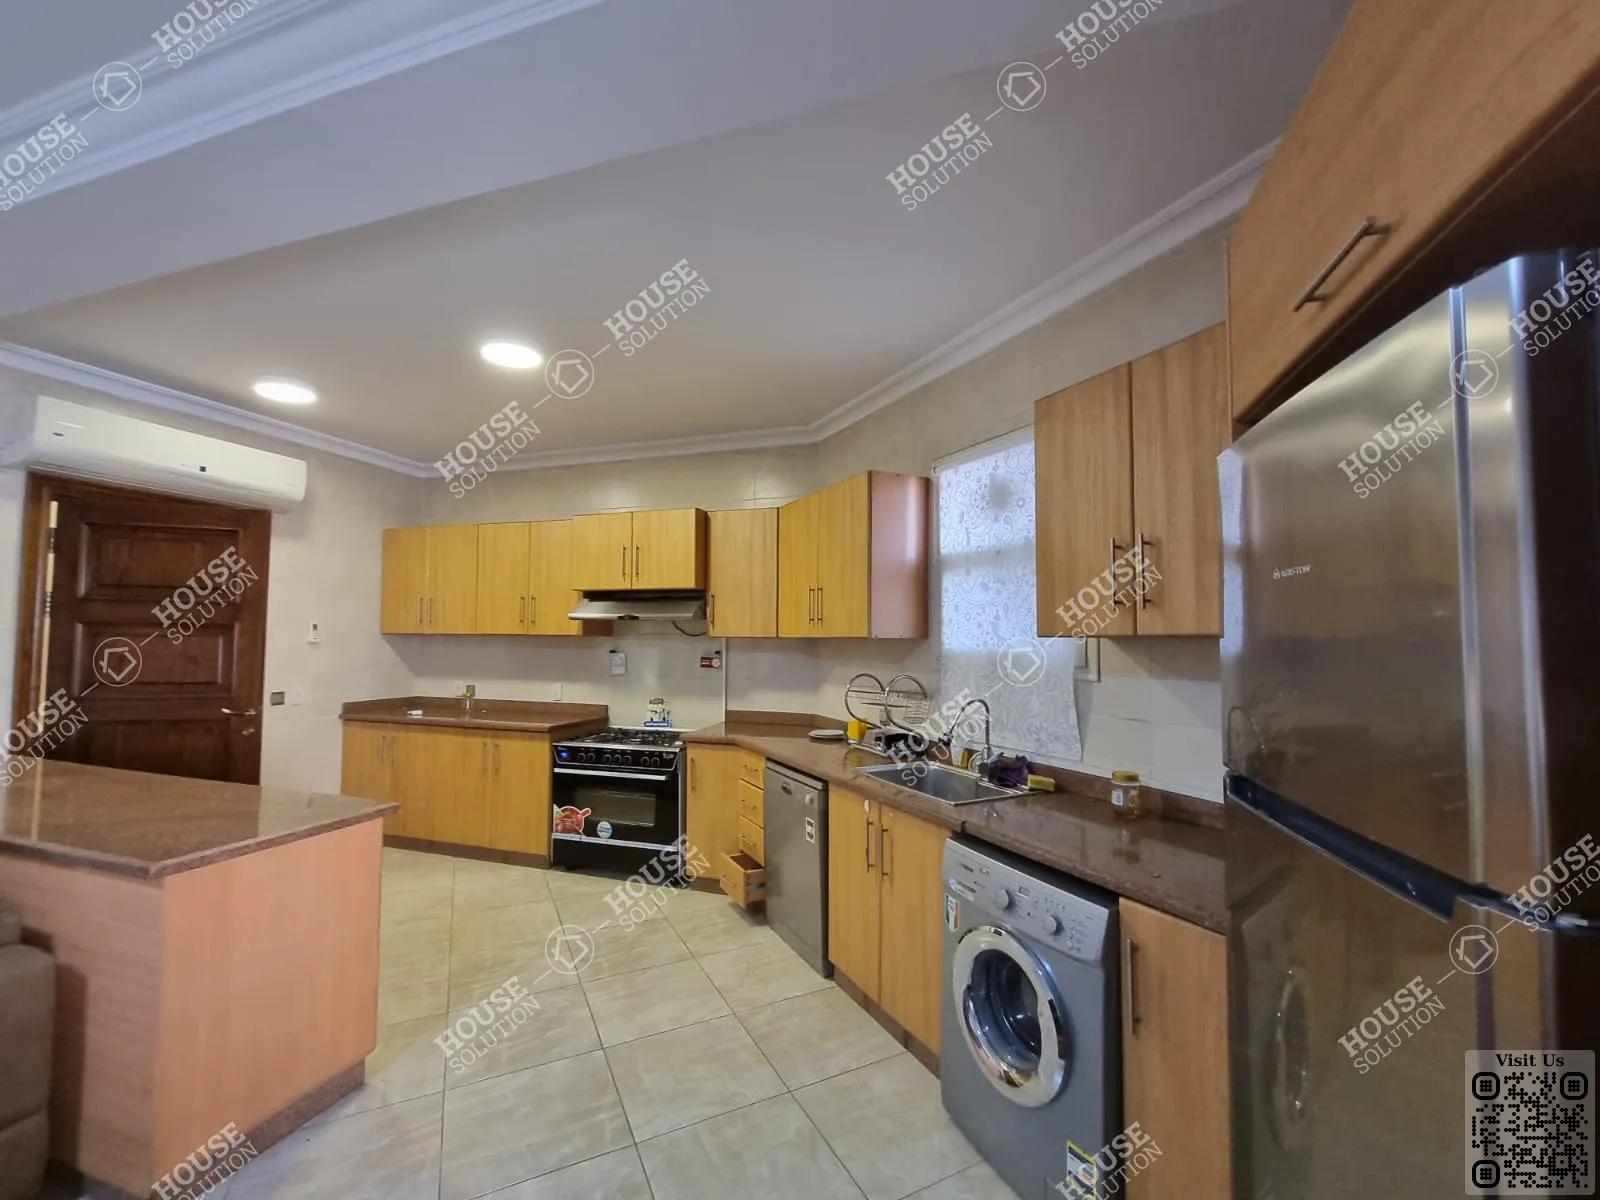 KITCHEN  @ Apartments For Rent In Maadi Maadi Sarayat Area: 280 m² consists of 3 Bedrooms 3 Bathrooms Modern furnished 5 stars #5163-1